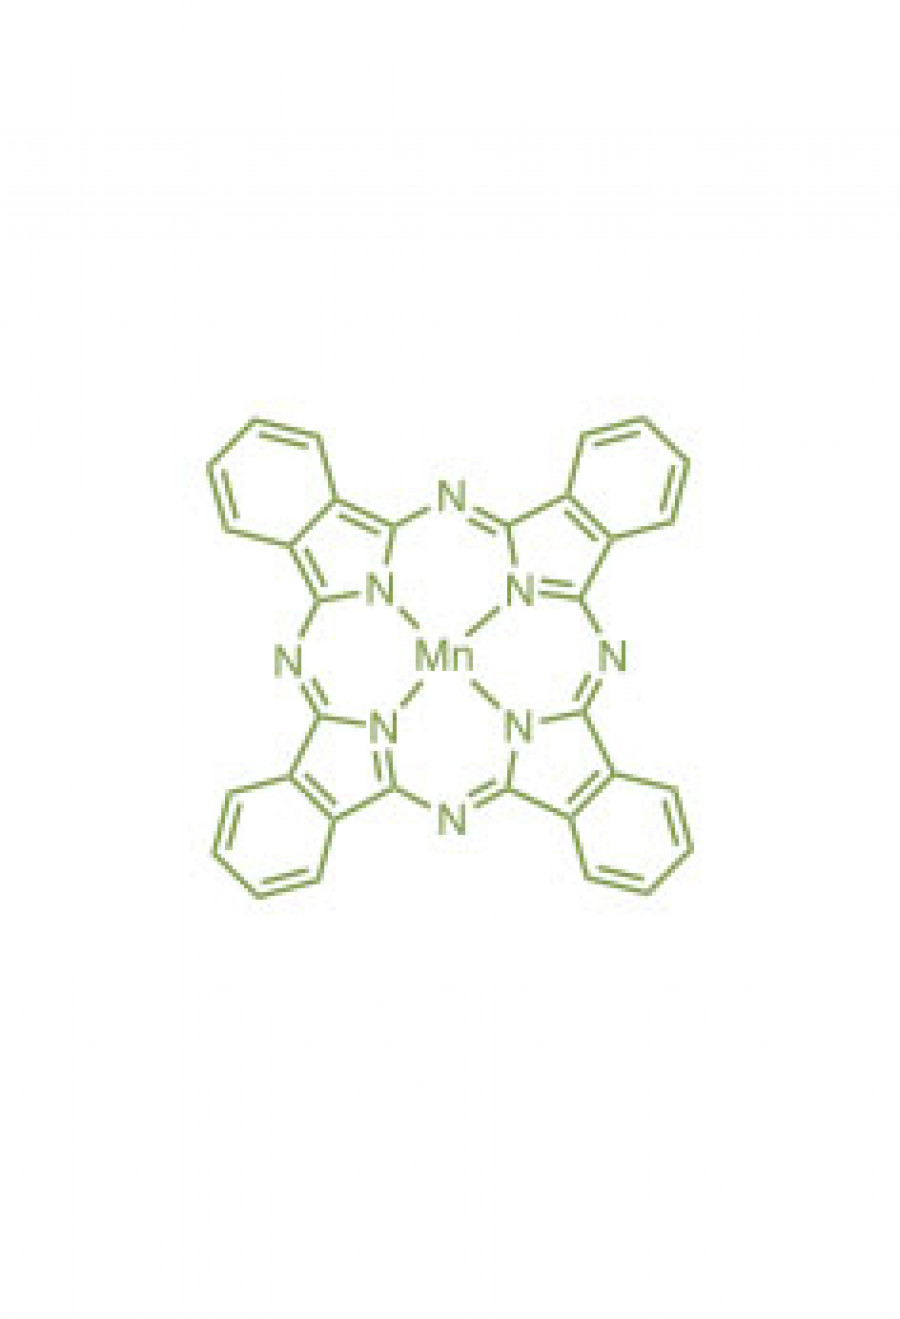 manganese(II) phthalocyanine  | Porphychem Expert porphyrin synthesis for research & industry